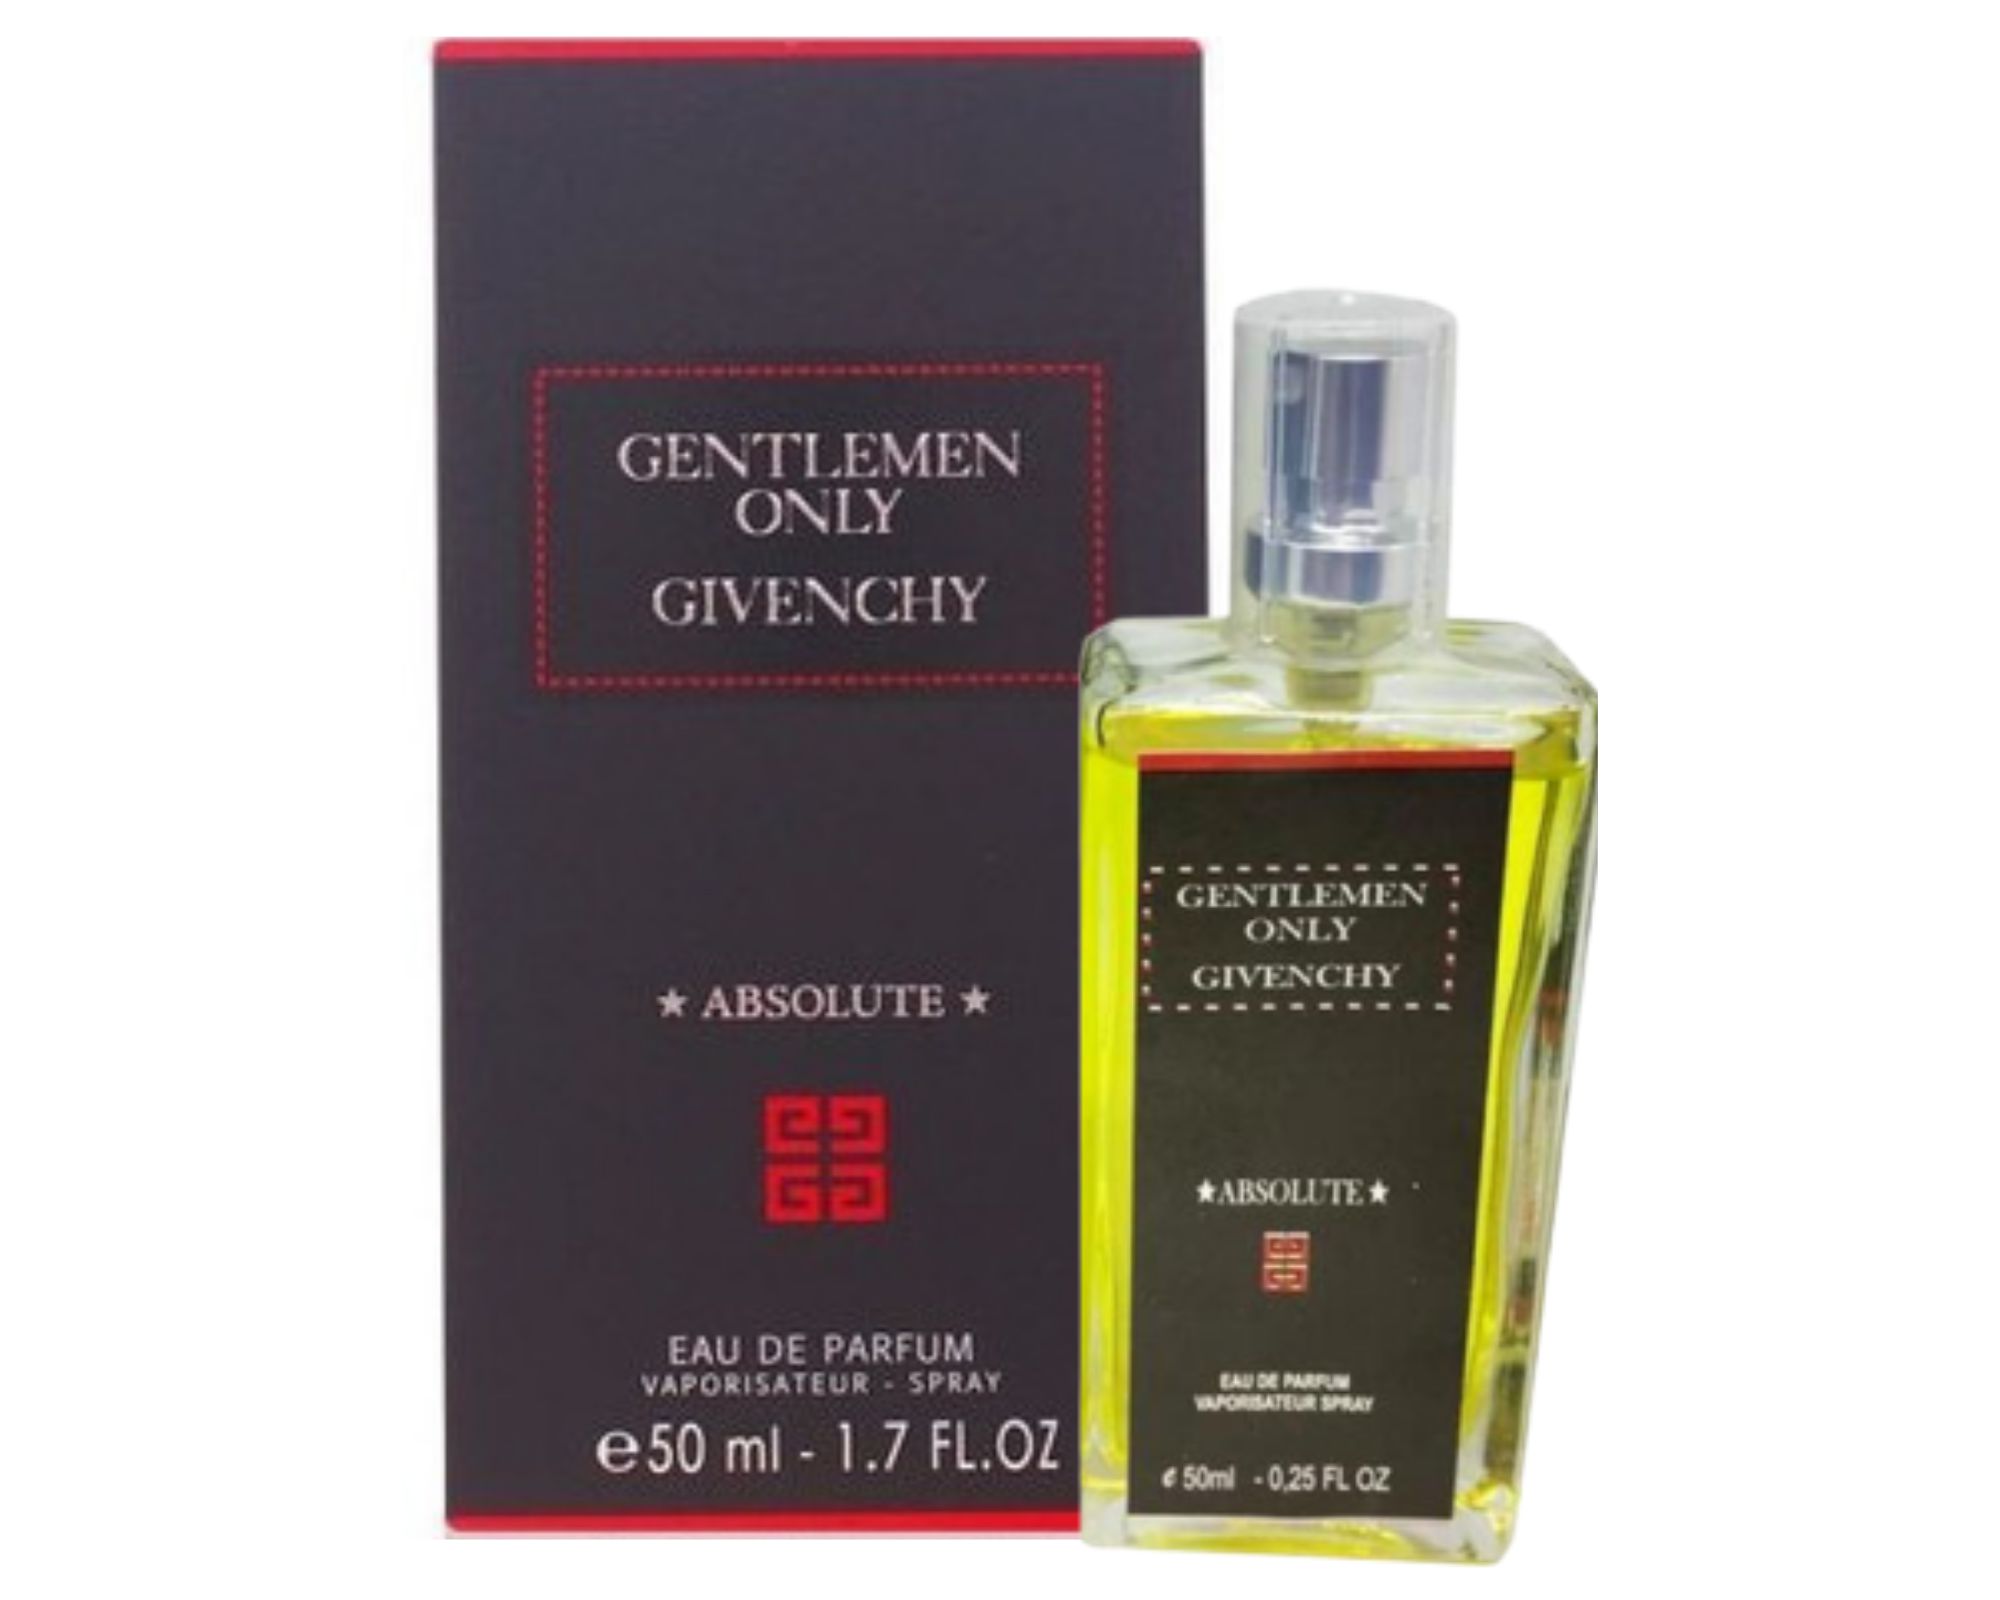 Perfume Contratipo Givenchy - Gentlemen Only Absolute - 50ml - Diga MakeUp